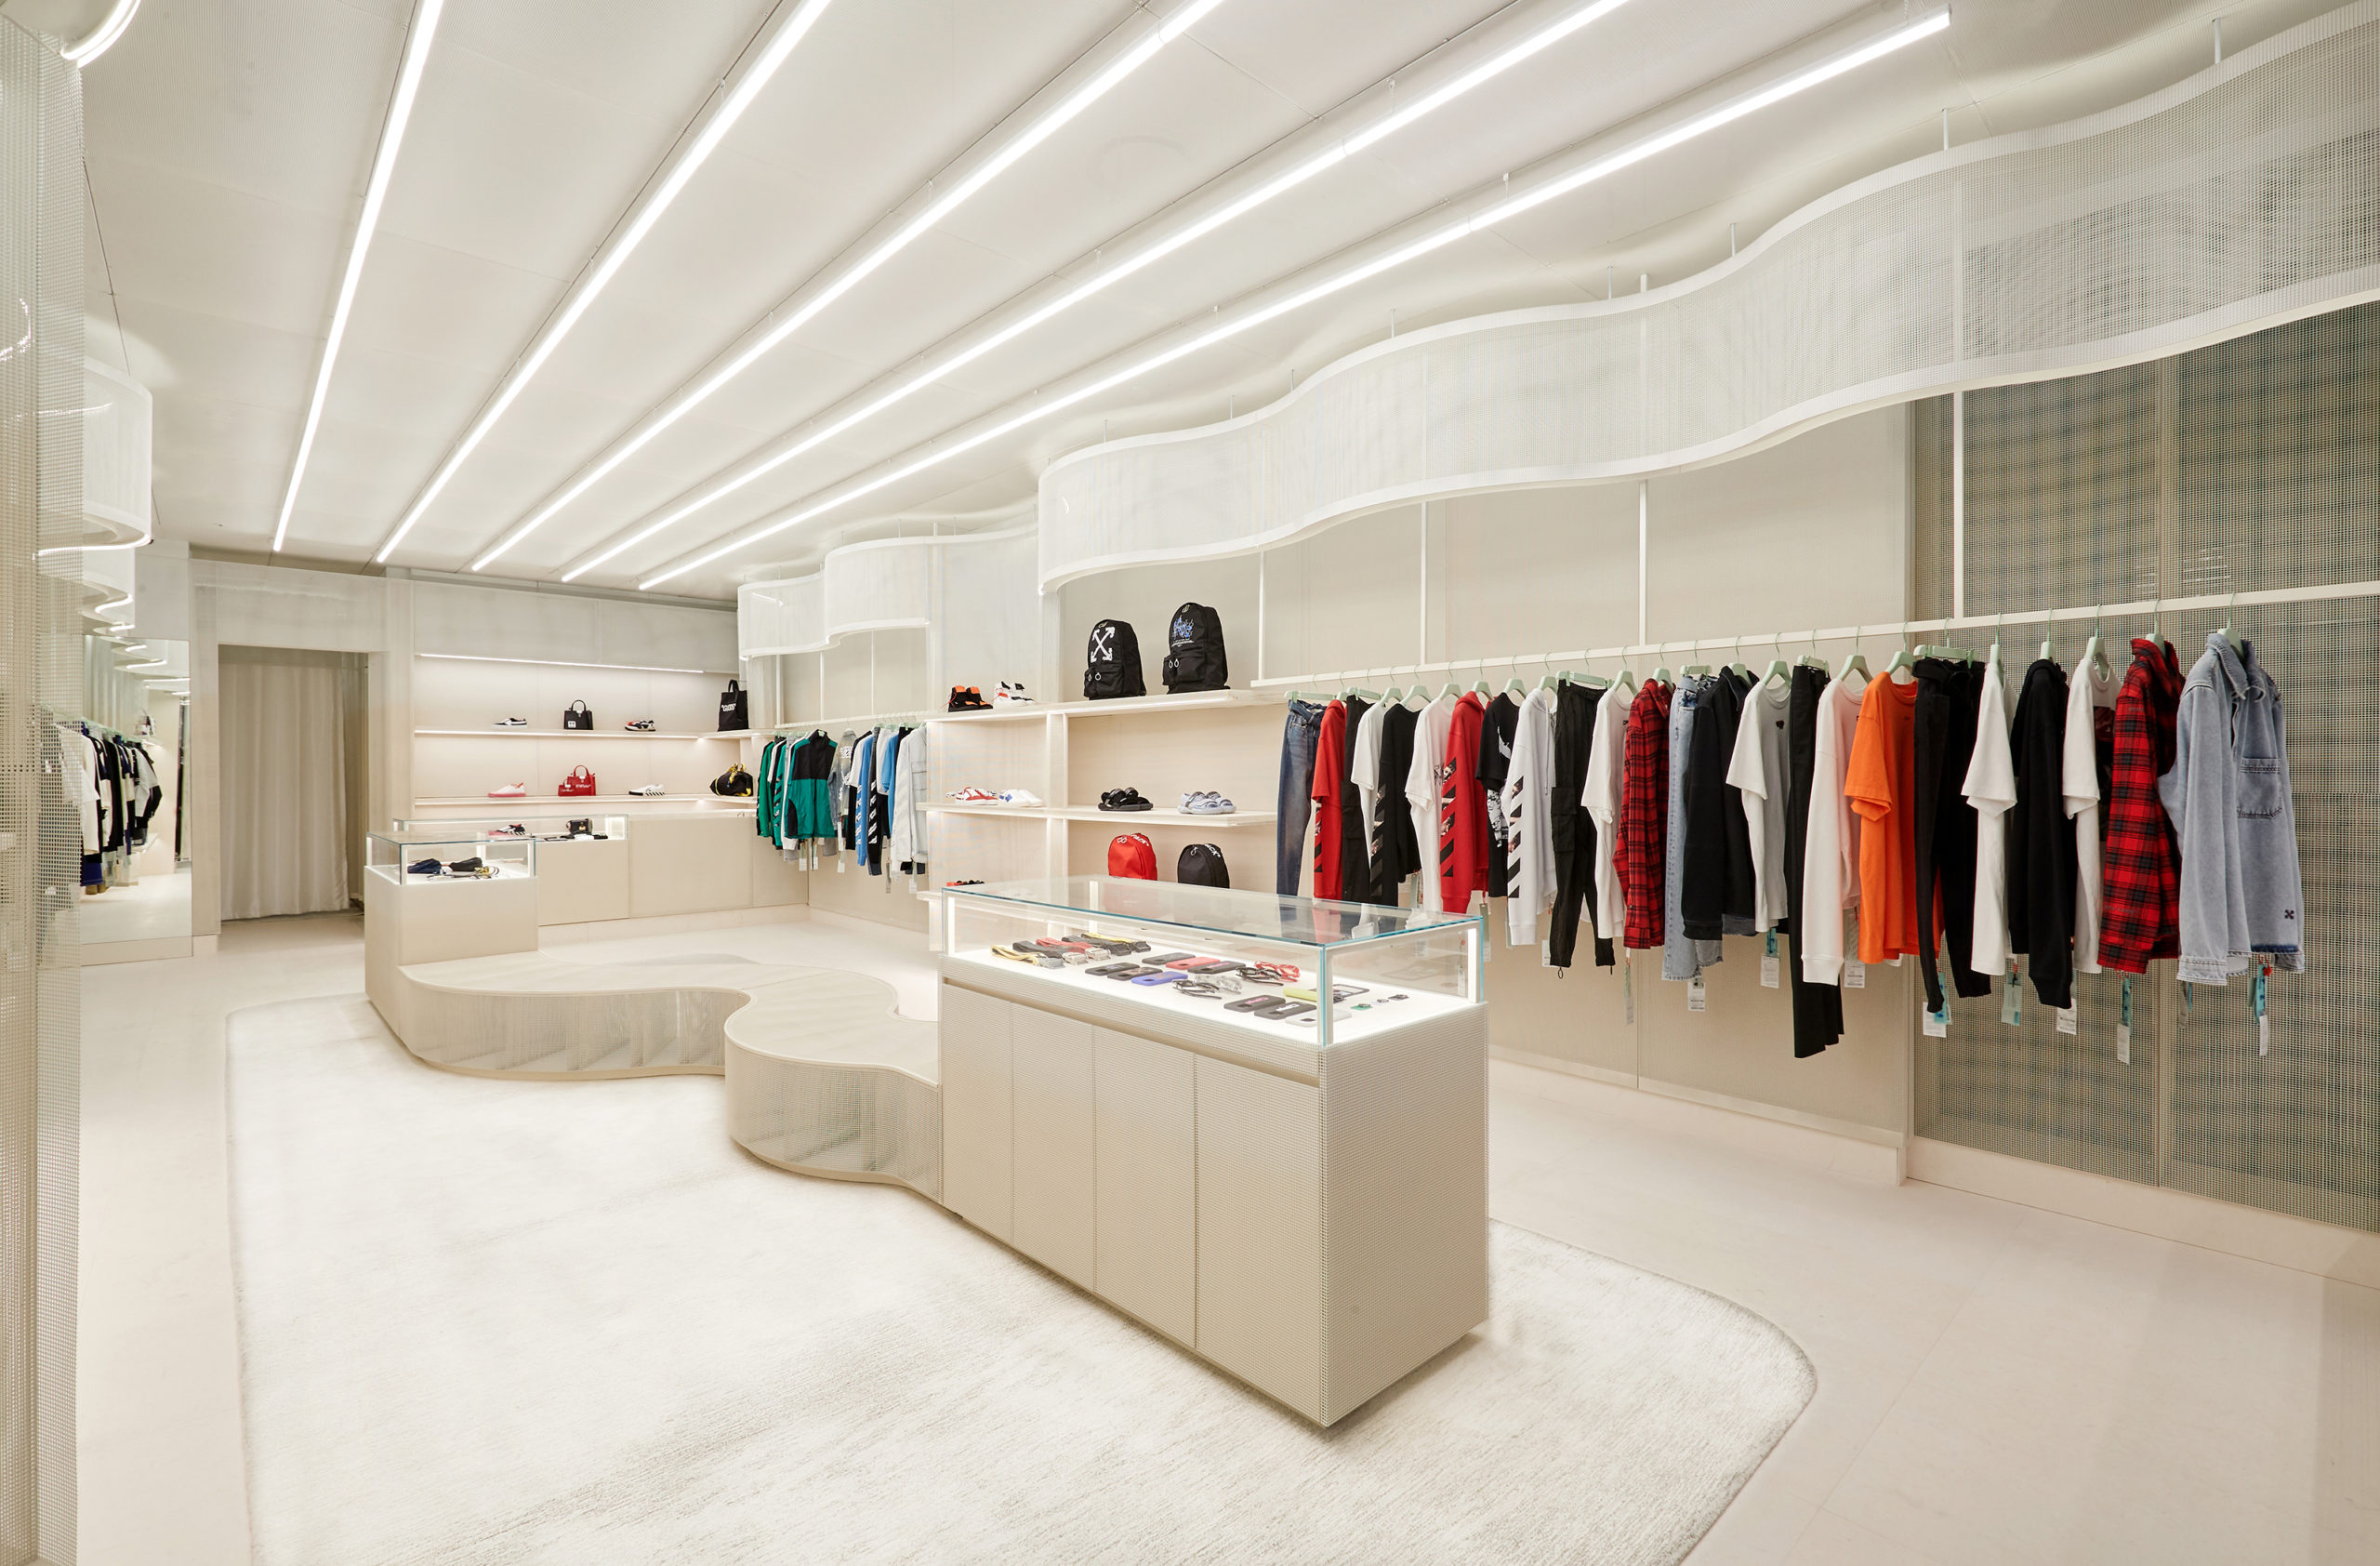 James Wines crafts an appropriately “off-white” interior for the